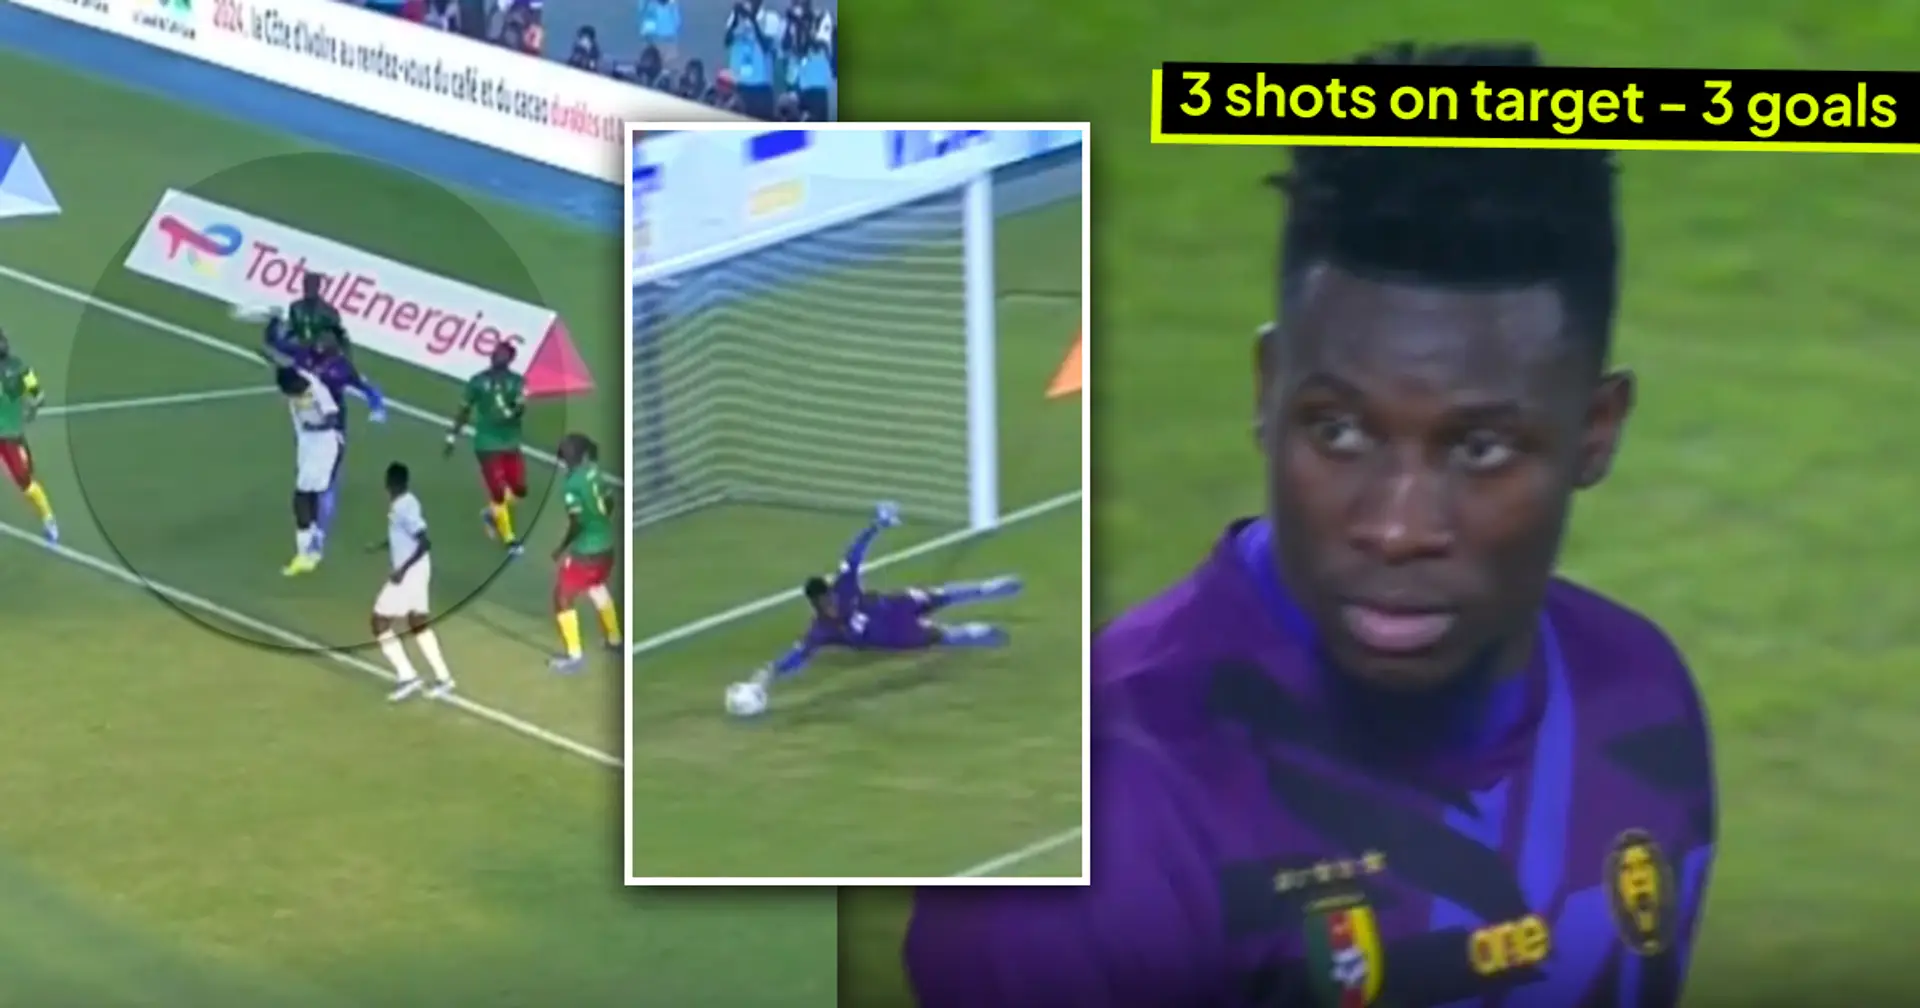 Andre Onana has worst save success rate at AFCON after two rounds — 0%